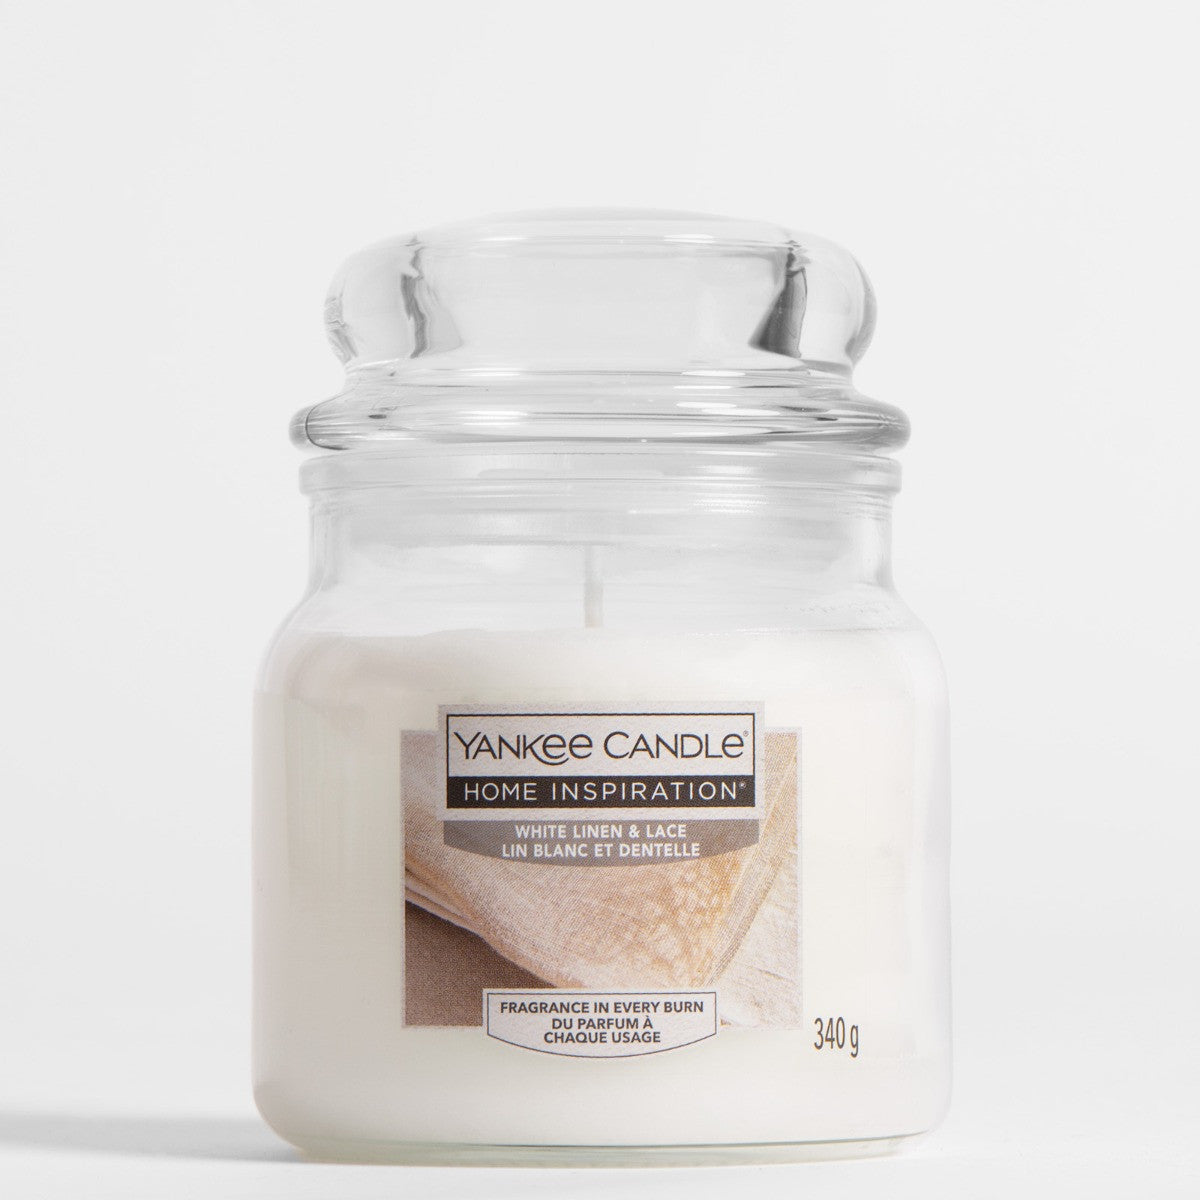 White Linen & Lace Medium Jar This elegant fragrance by Yankee Candle® Home Inspiration® features top notes of ozonic breeze, apple blossom, and raspberry leaf.